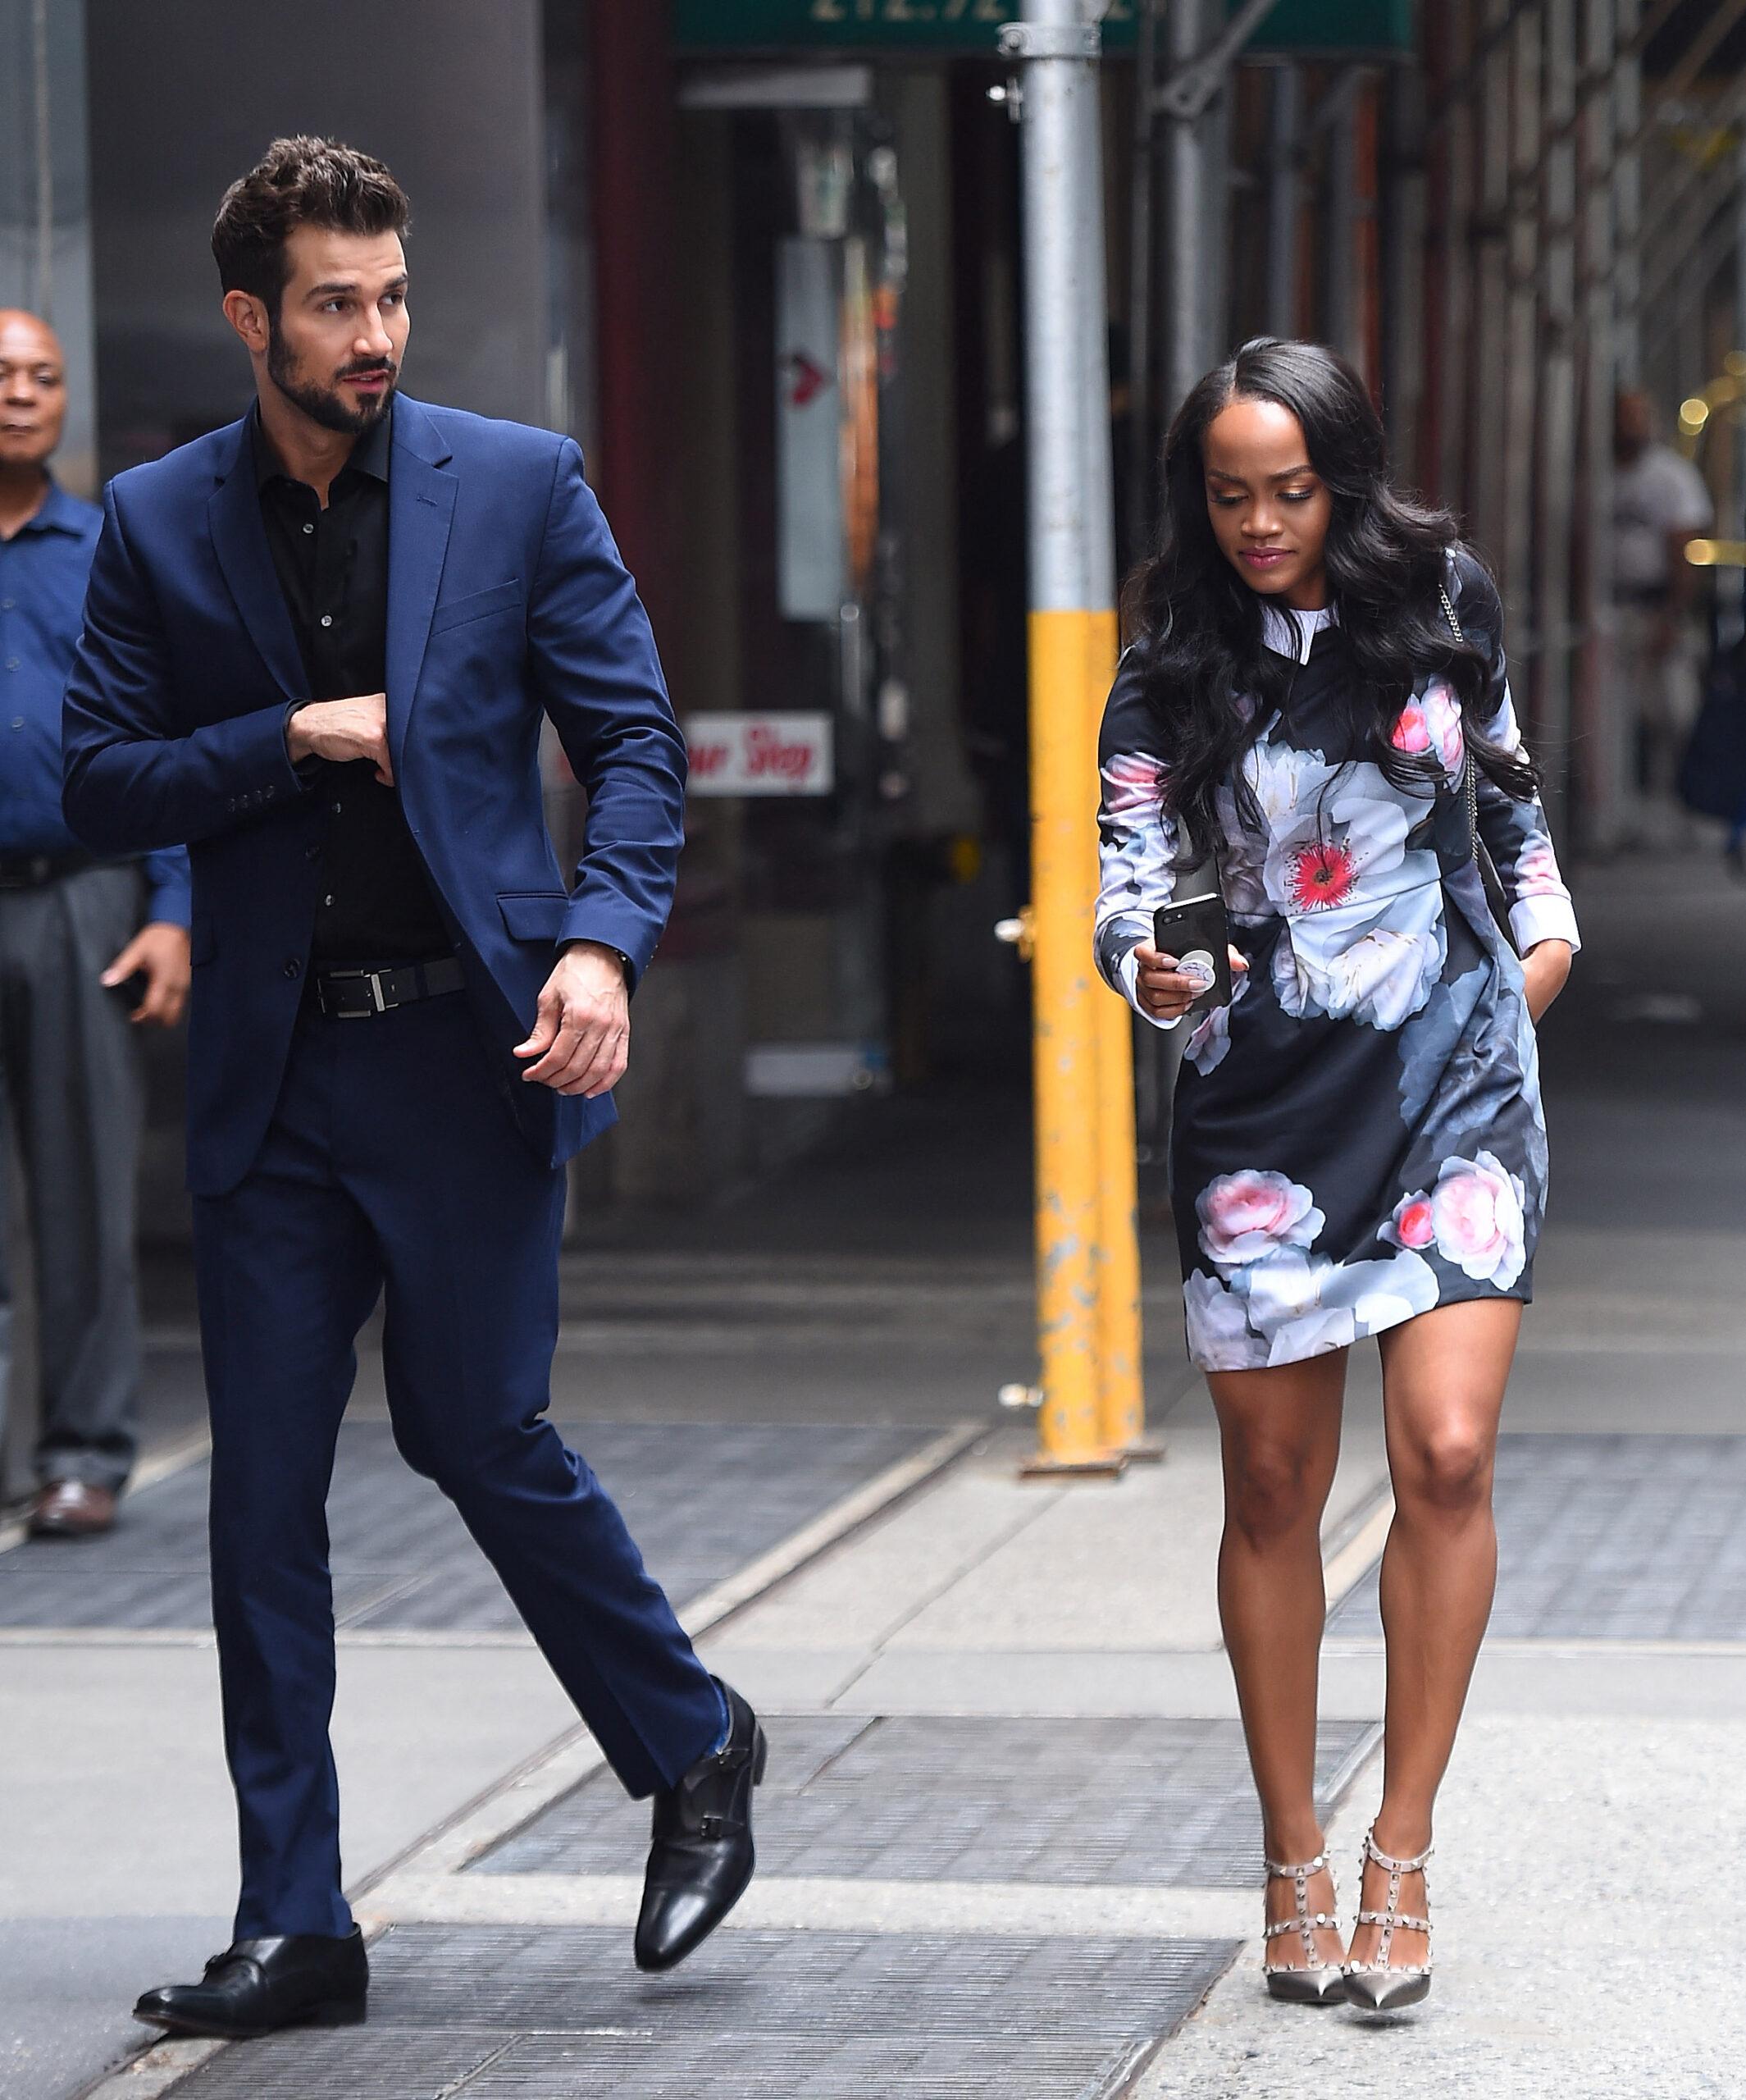 Rachel Lindsay and Bryan Abasolo stop by the 